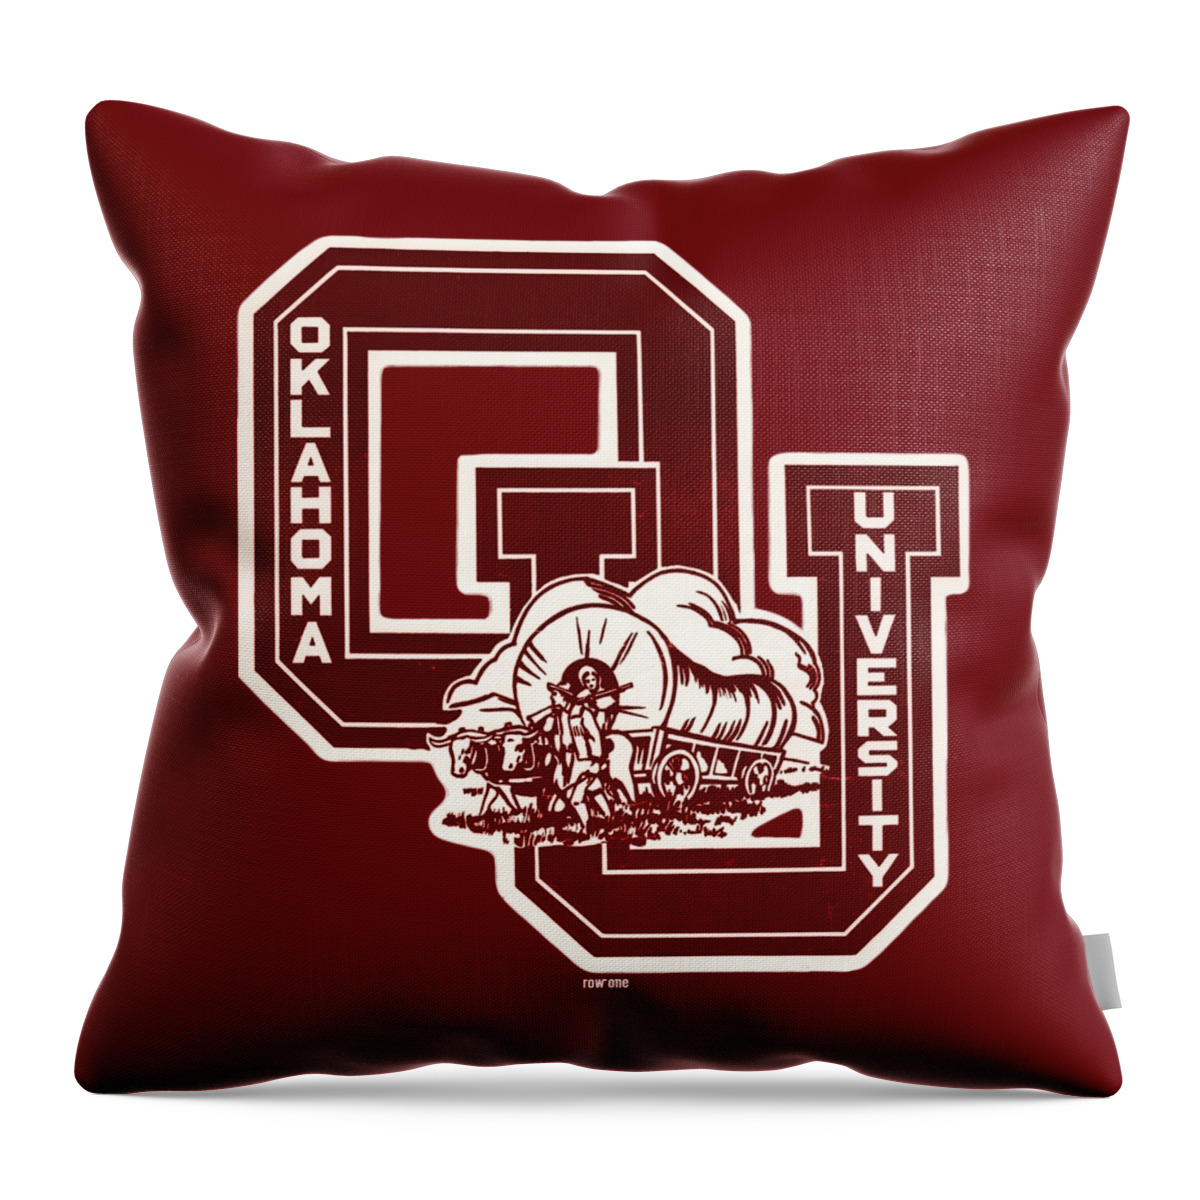 Oklahoma Throw Pillow featuring the mixed media Vintage Oklahoma Sooners Art by Row One Brand